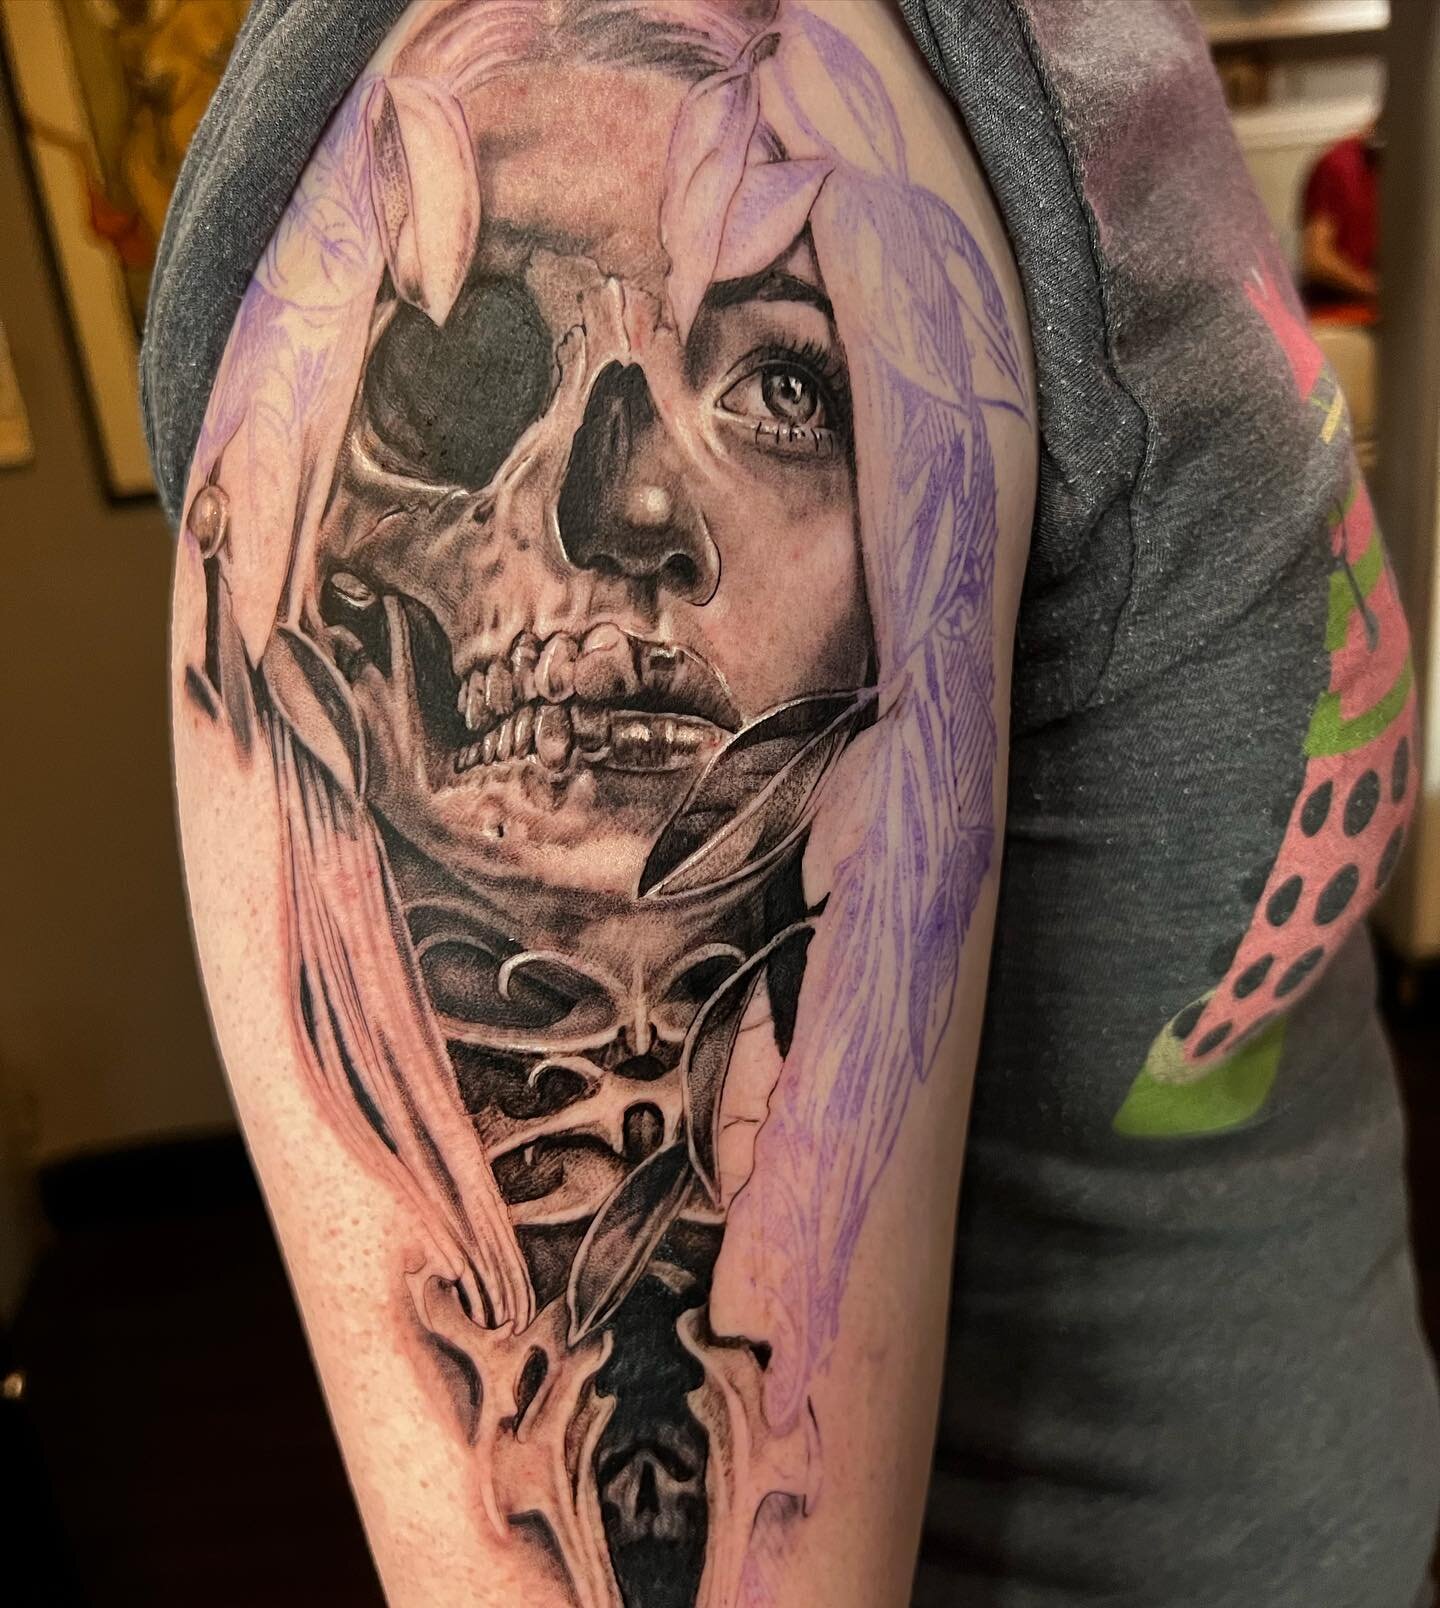 First appointment on my interpretation of Hel. I&rsquo;m having such a great time doing this, thanks Seth!
 #blackandgreytattoo #blackandgrey #blacktattoo #tattoo #tattooartist #sandiegotattooartist #sandiego #sandiegotattooshop #art #tattooideas #ta